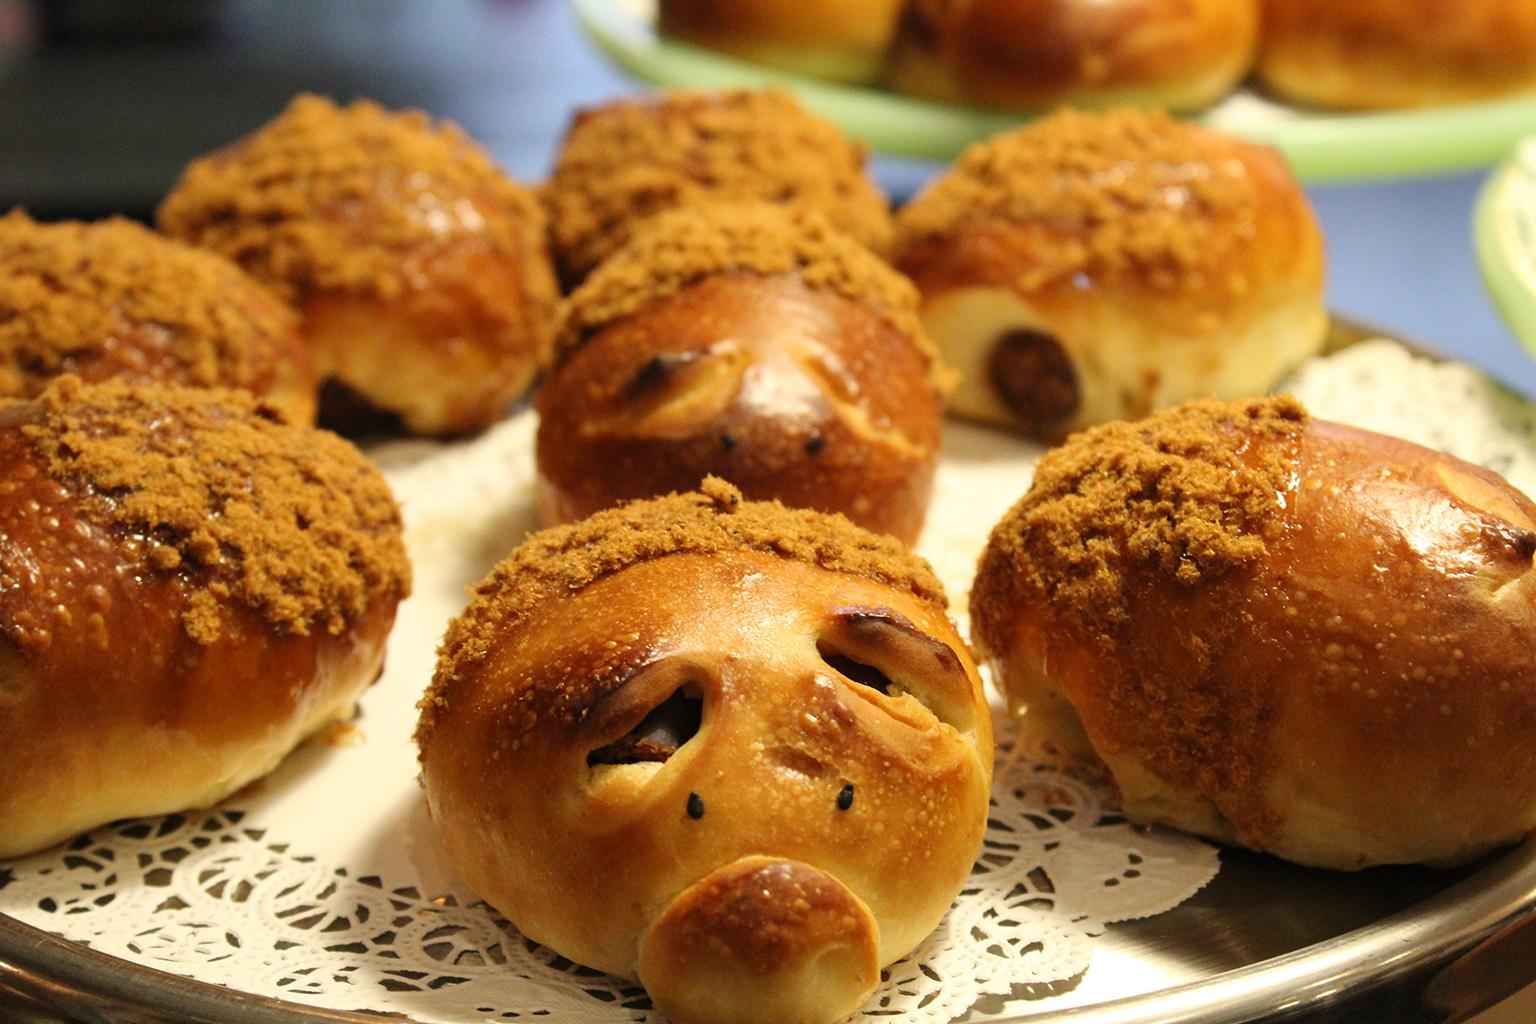 Pig Bun pastries at The Bakery at Fat Rice. (Courtesy of Fat Rice)